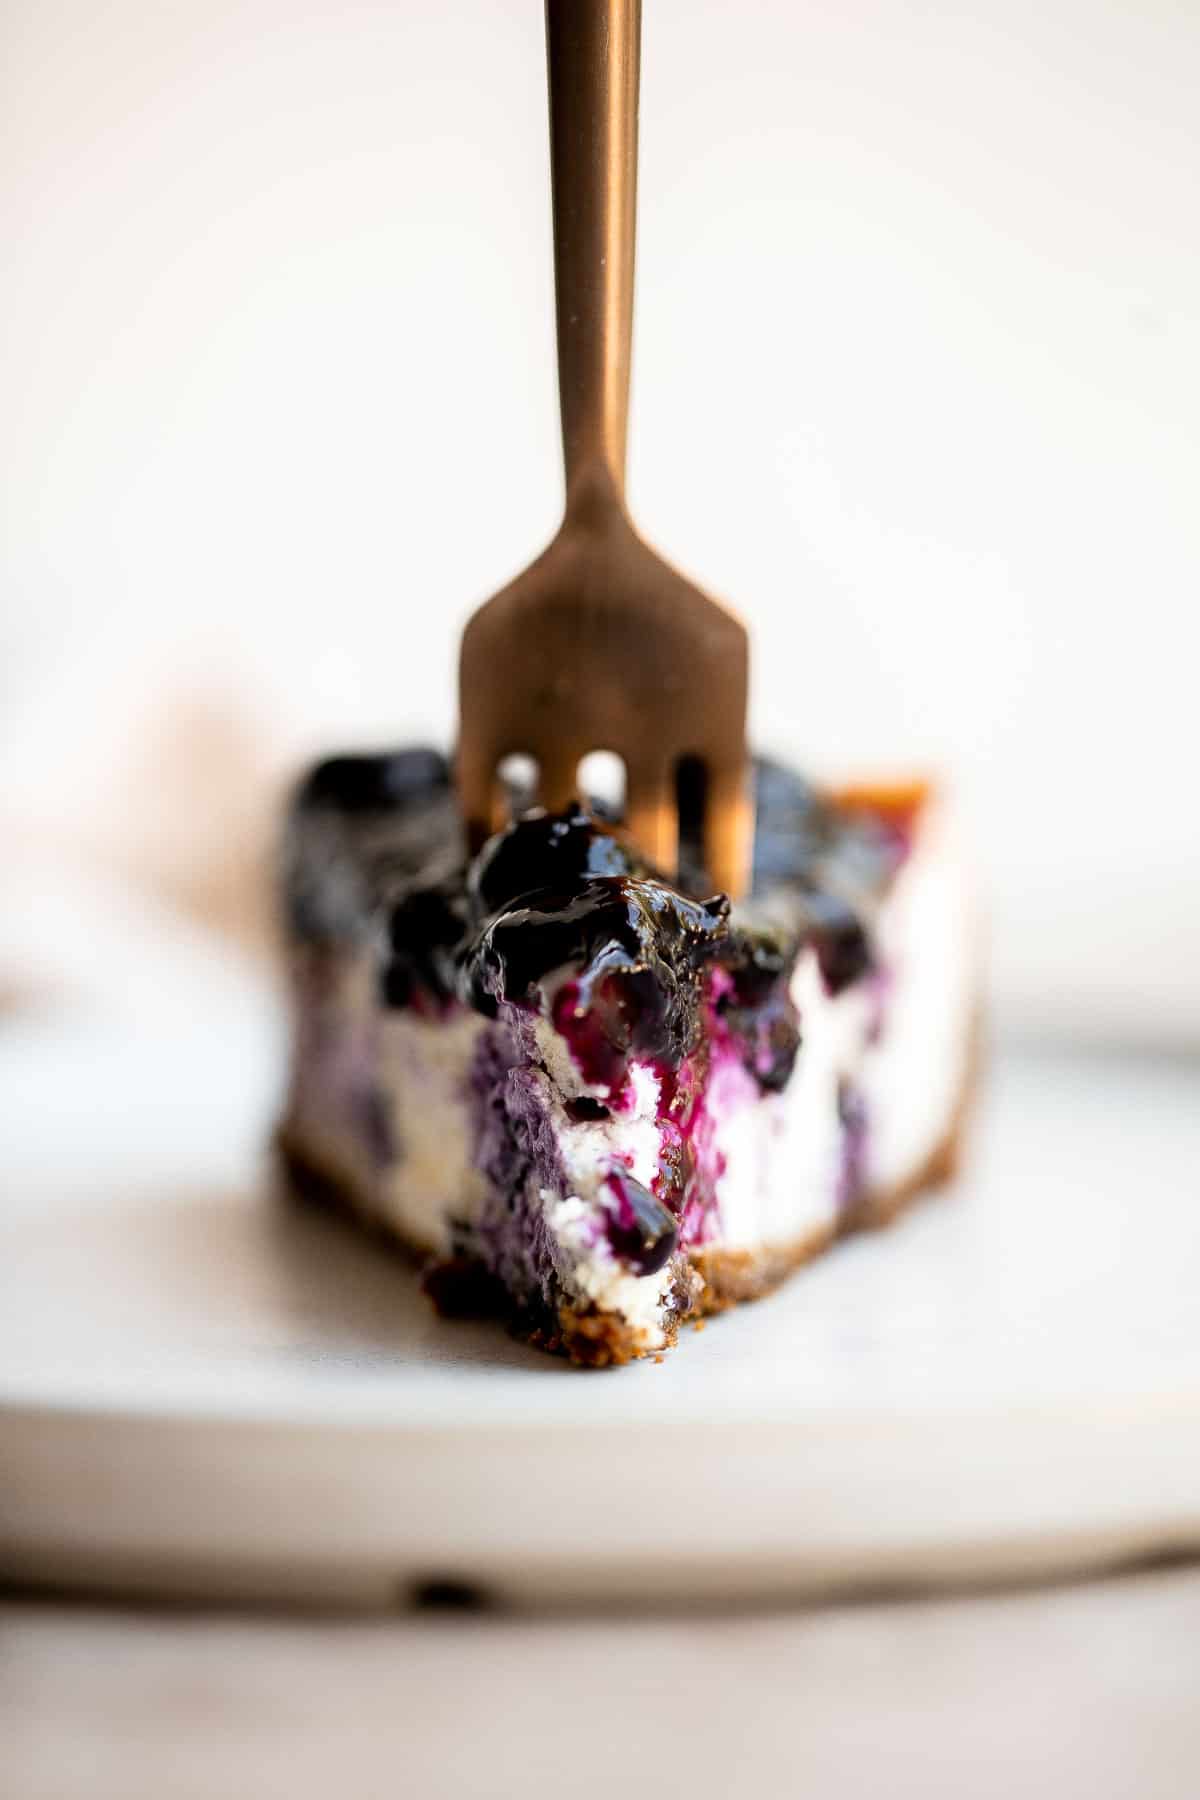 This Blueberry Cheesecake is rich, sweet, and smooth with a creamy cheesecake layer packed with blueberries and topped with sweet blueberry sauce. | aheadofthyme.com